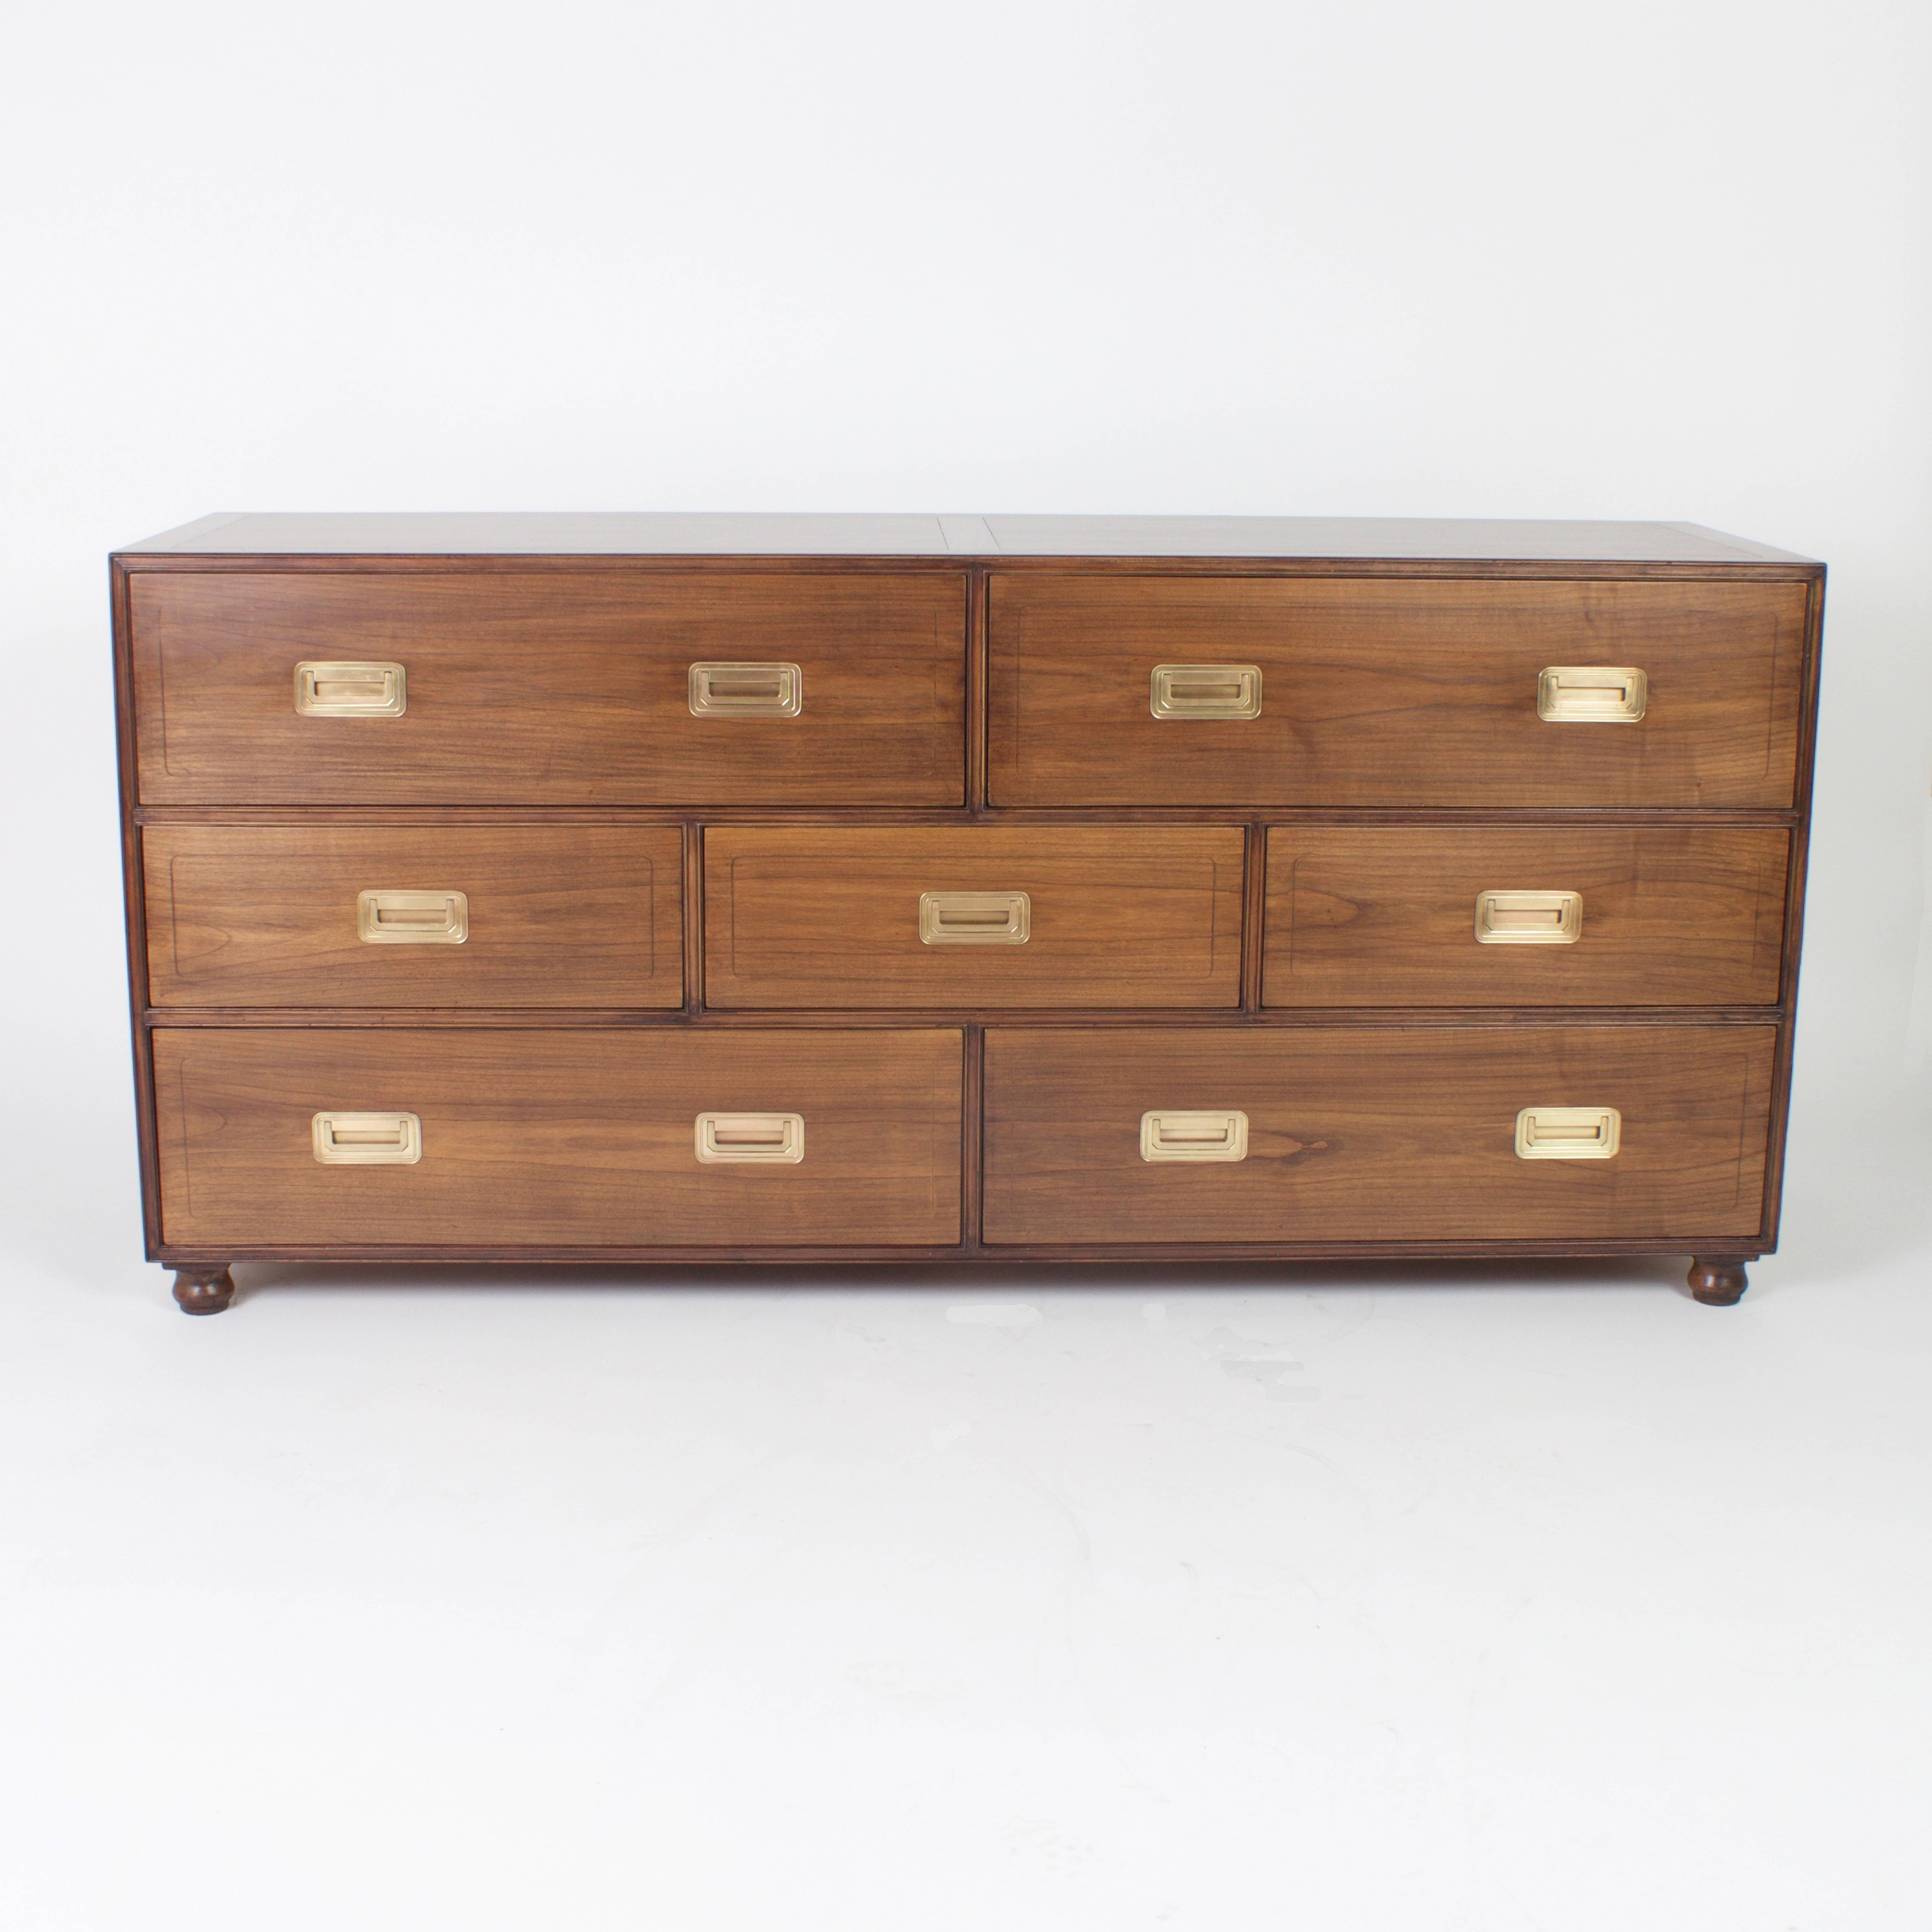 Handsome Baker mid century campaign style chest or double dresser with sleek modern lines. Having 7 drawers with quality brass hardware and unsual asymmetrical alignment, all over turned feet. Signed Baker on a silver label. ($6,450 each or sold as